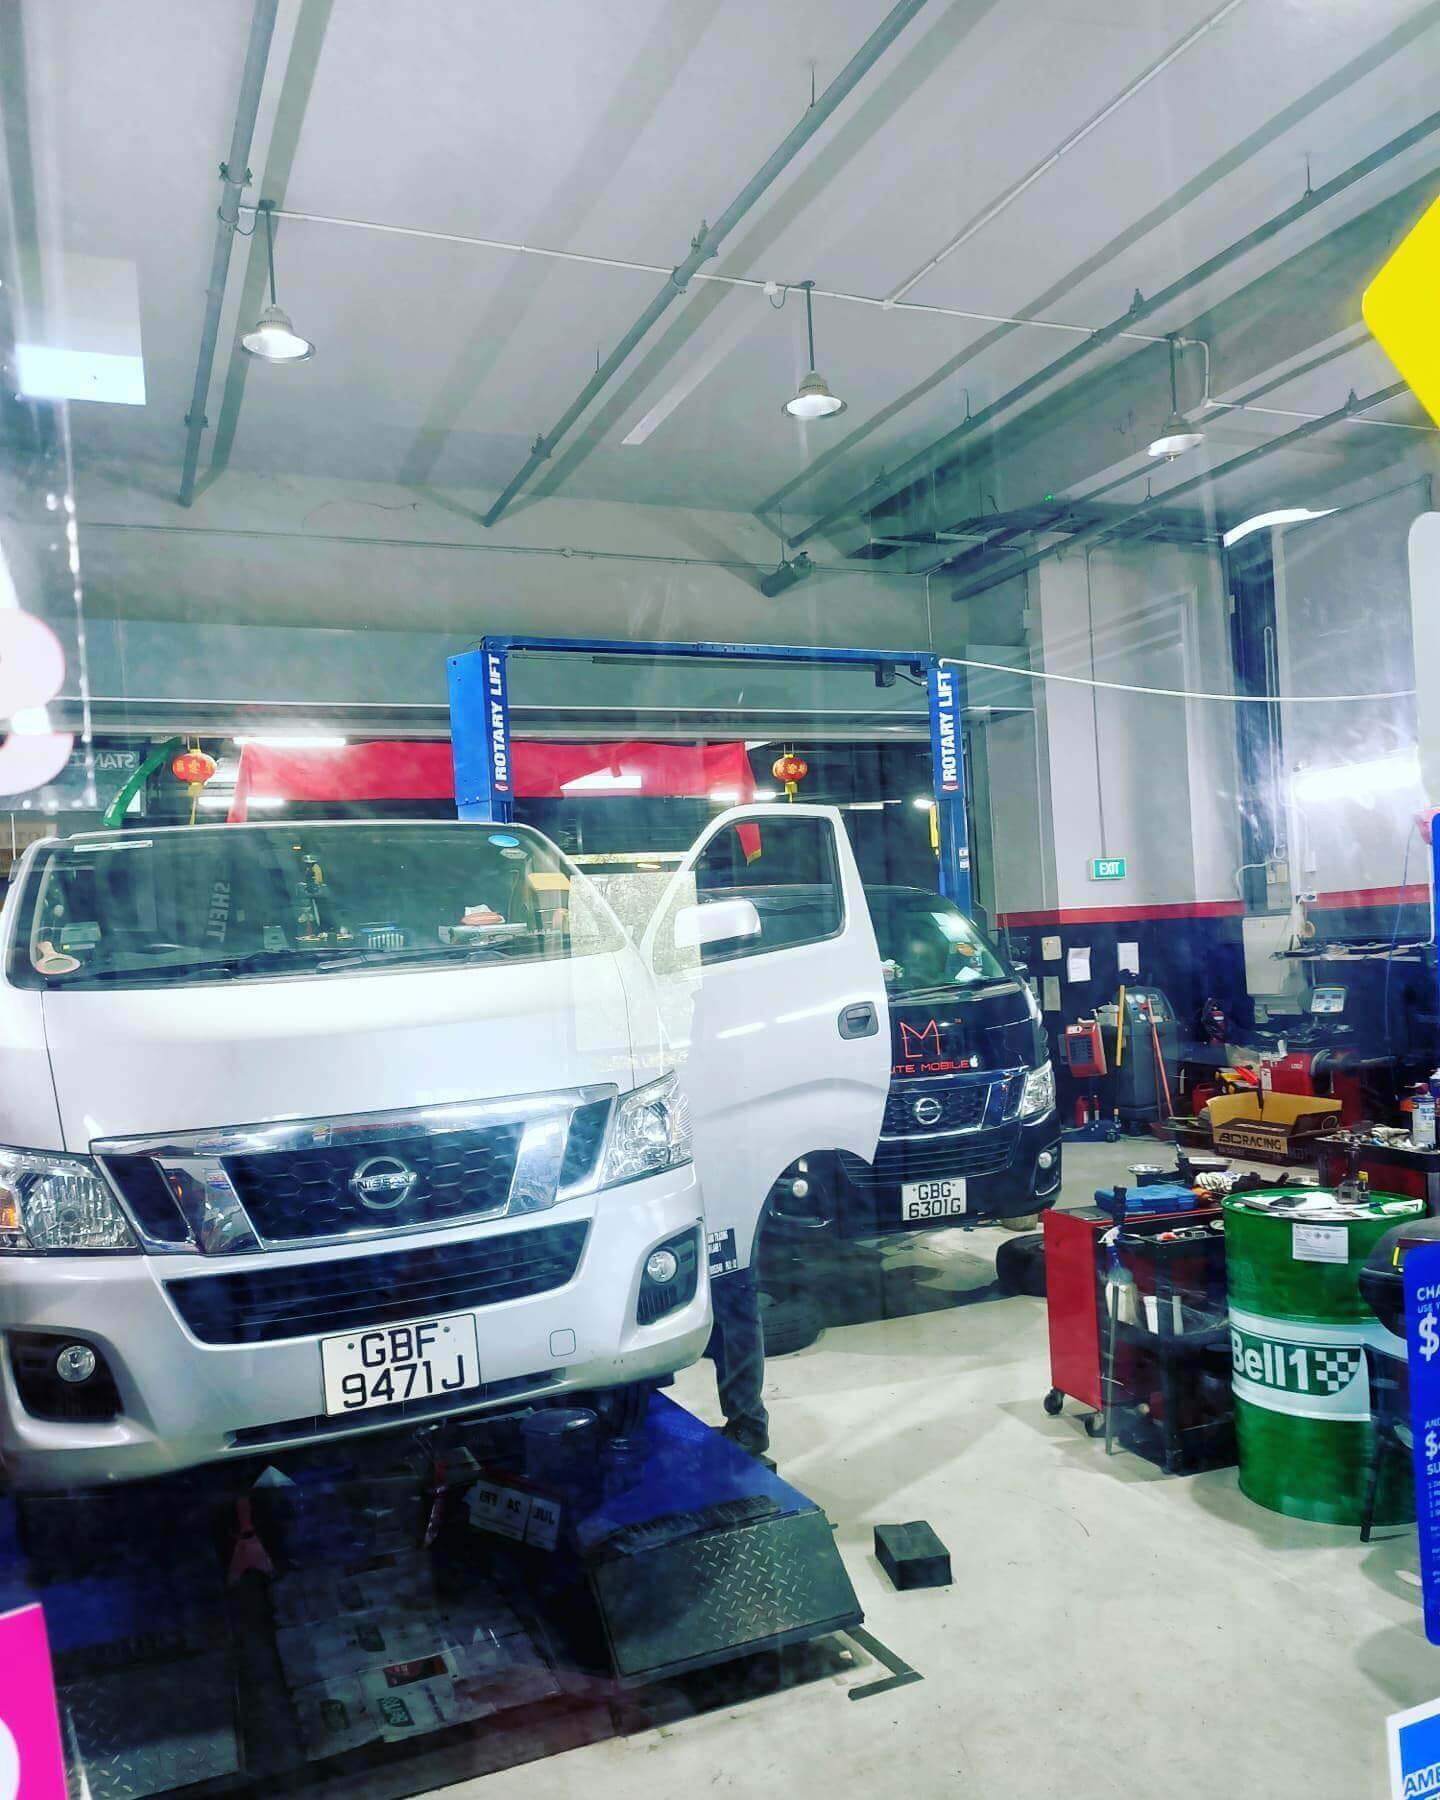 (Sold) Car Service & Repair WorkShop For Sale In Good Location